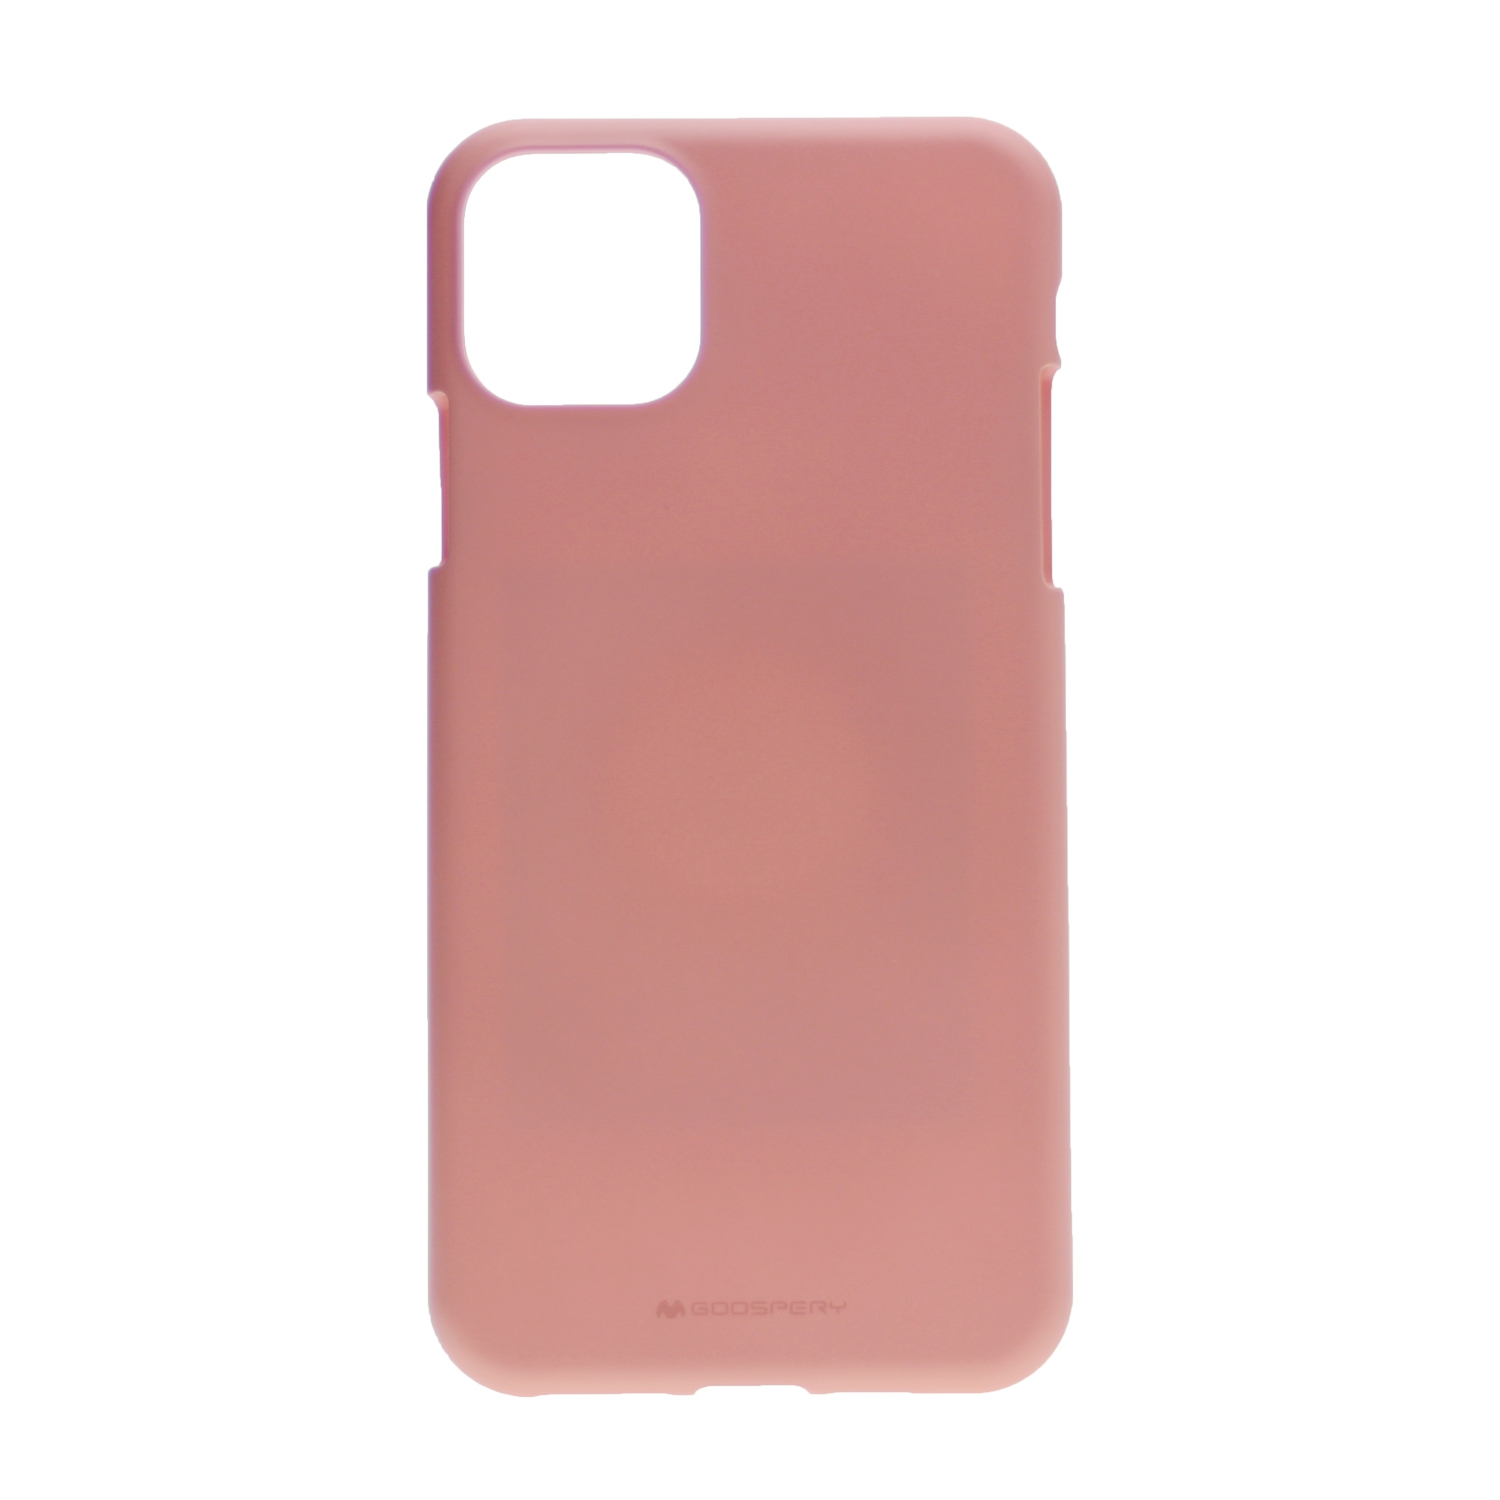 TopSave GOOSPERY Soft Feeling Jelly Silky Slim Bumper Case For Iphone 12 Mini, Pink